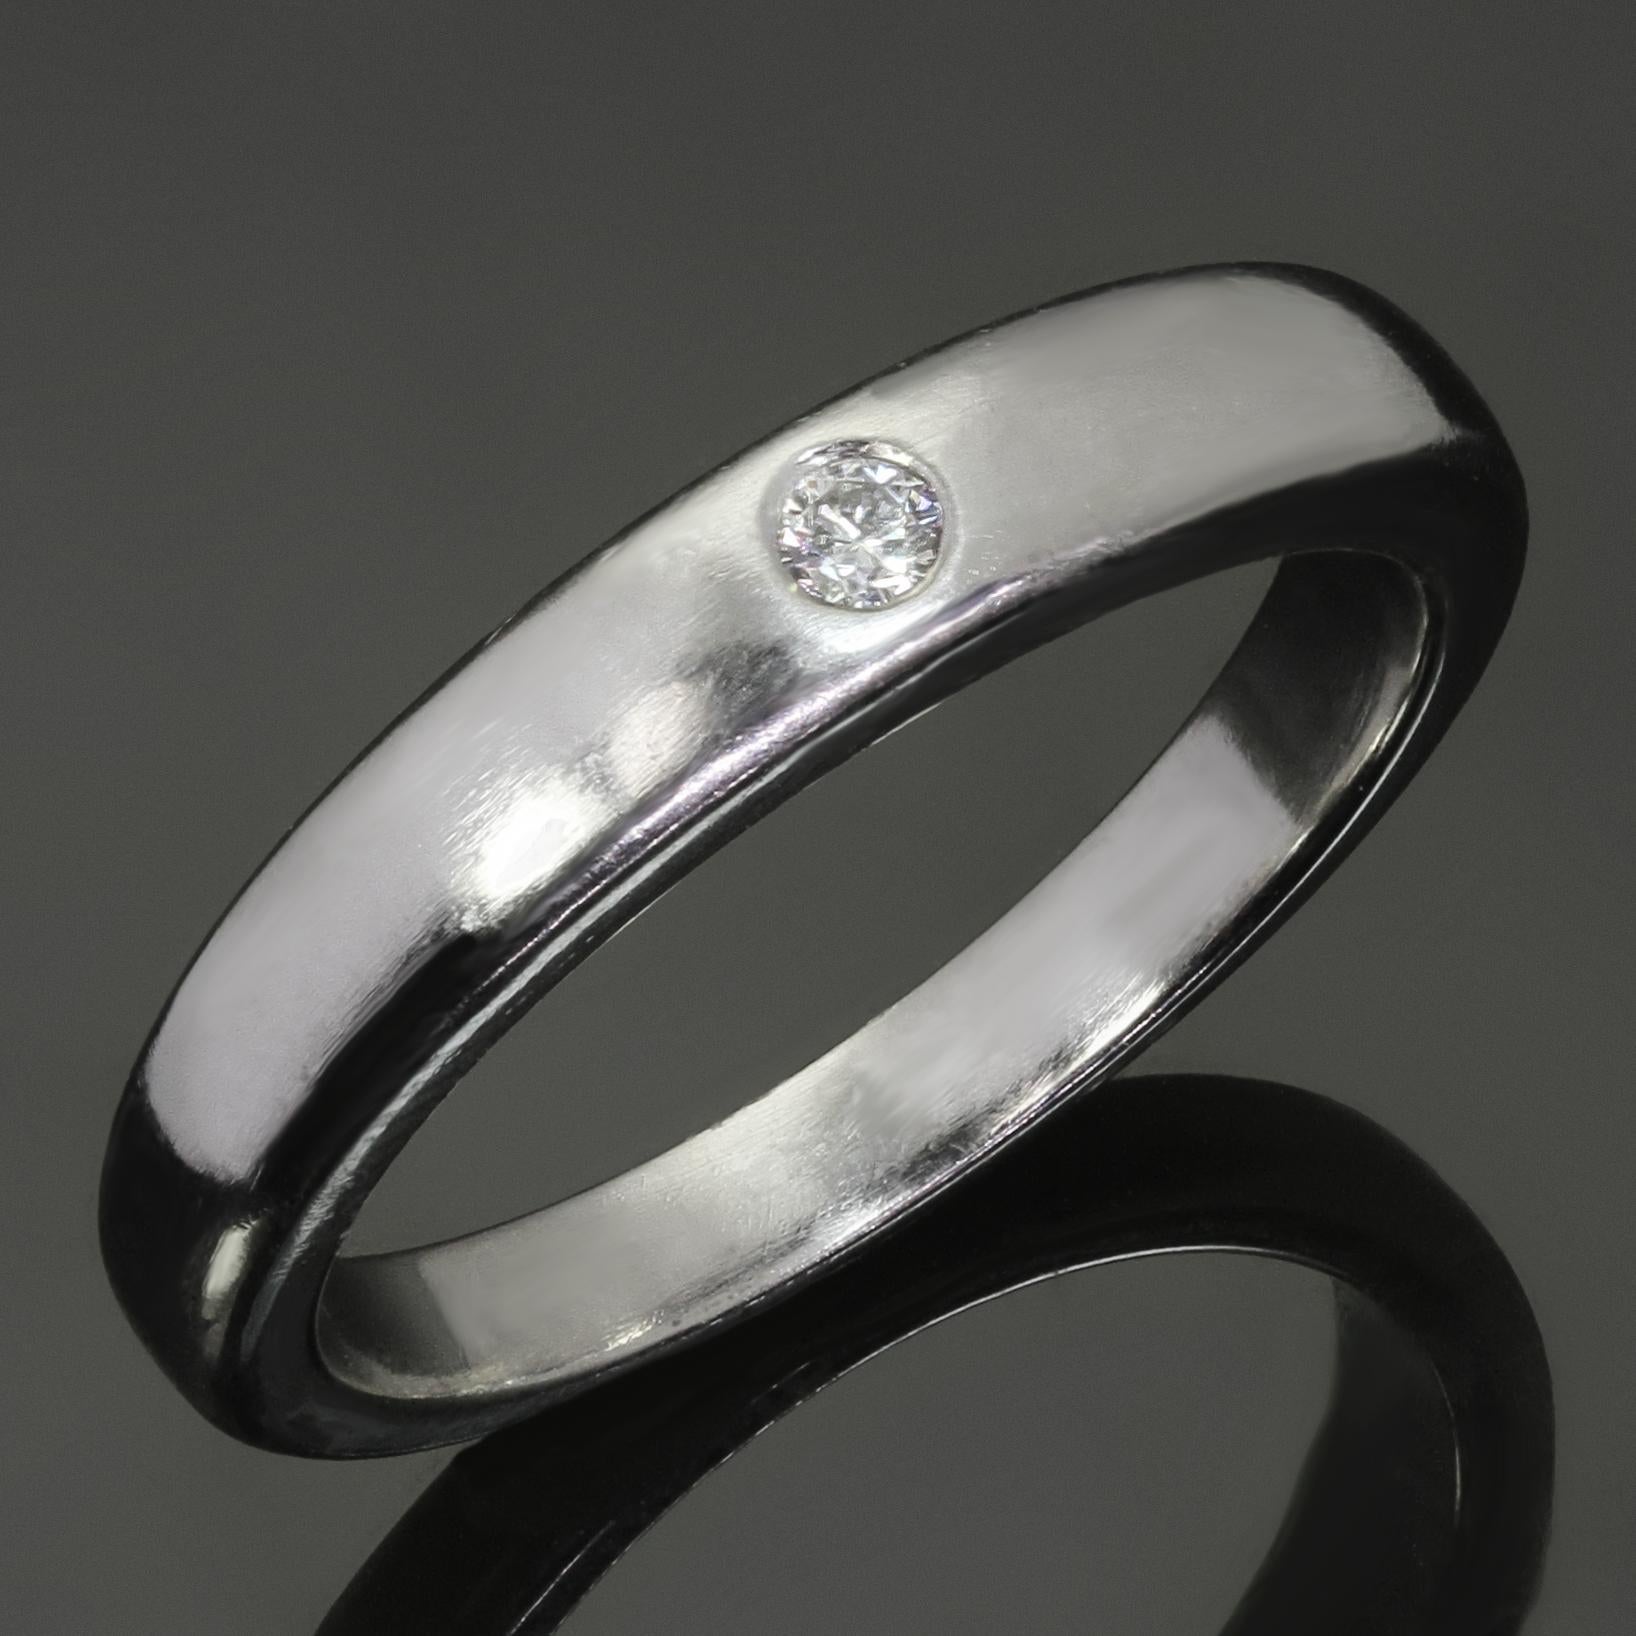 This classic Van Cleef & Arpels band ring is crafted in 950 platinum and set with a solitaire brilliant-cut D-E-F VVS1-VVS2 diamond weighing an estimated 0.05 carats. Made in France circa 2000s. Measurements: 0.15